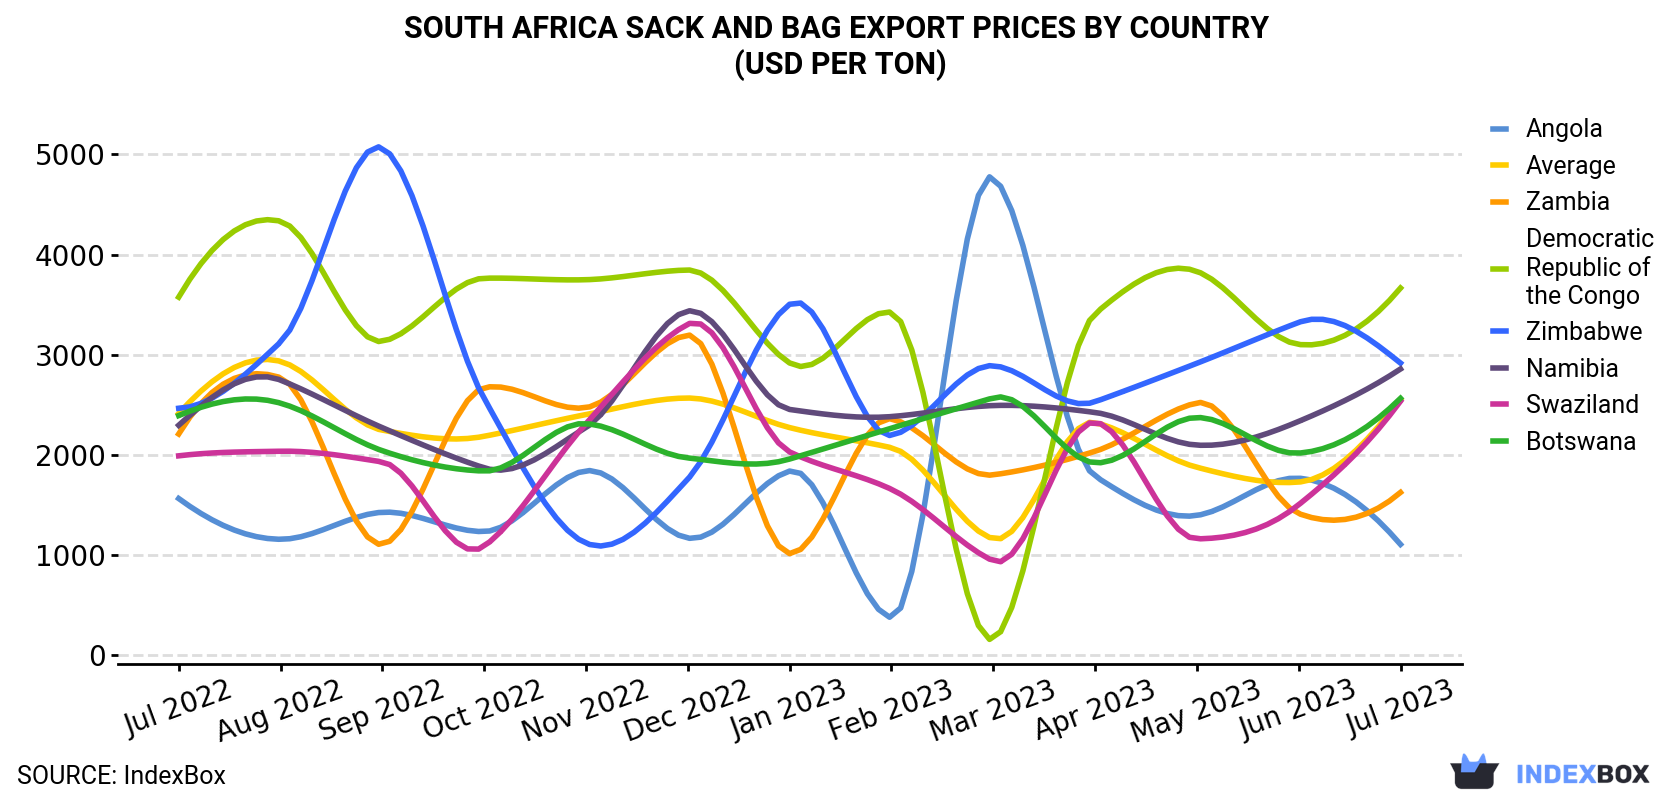 South Africa Sack And Bag Export Prices By Country (USD Per Ton)